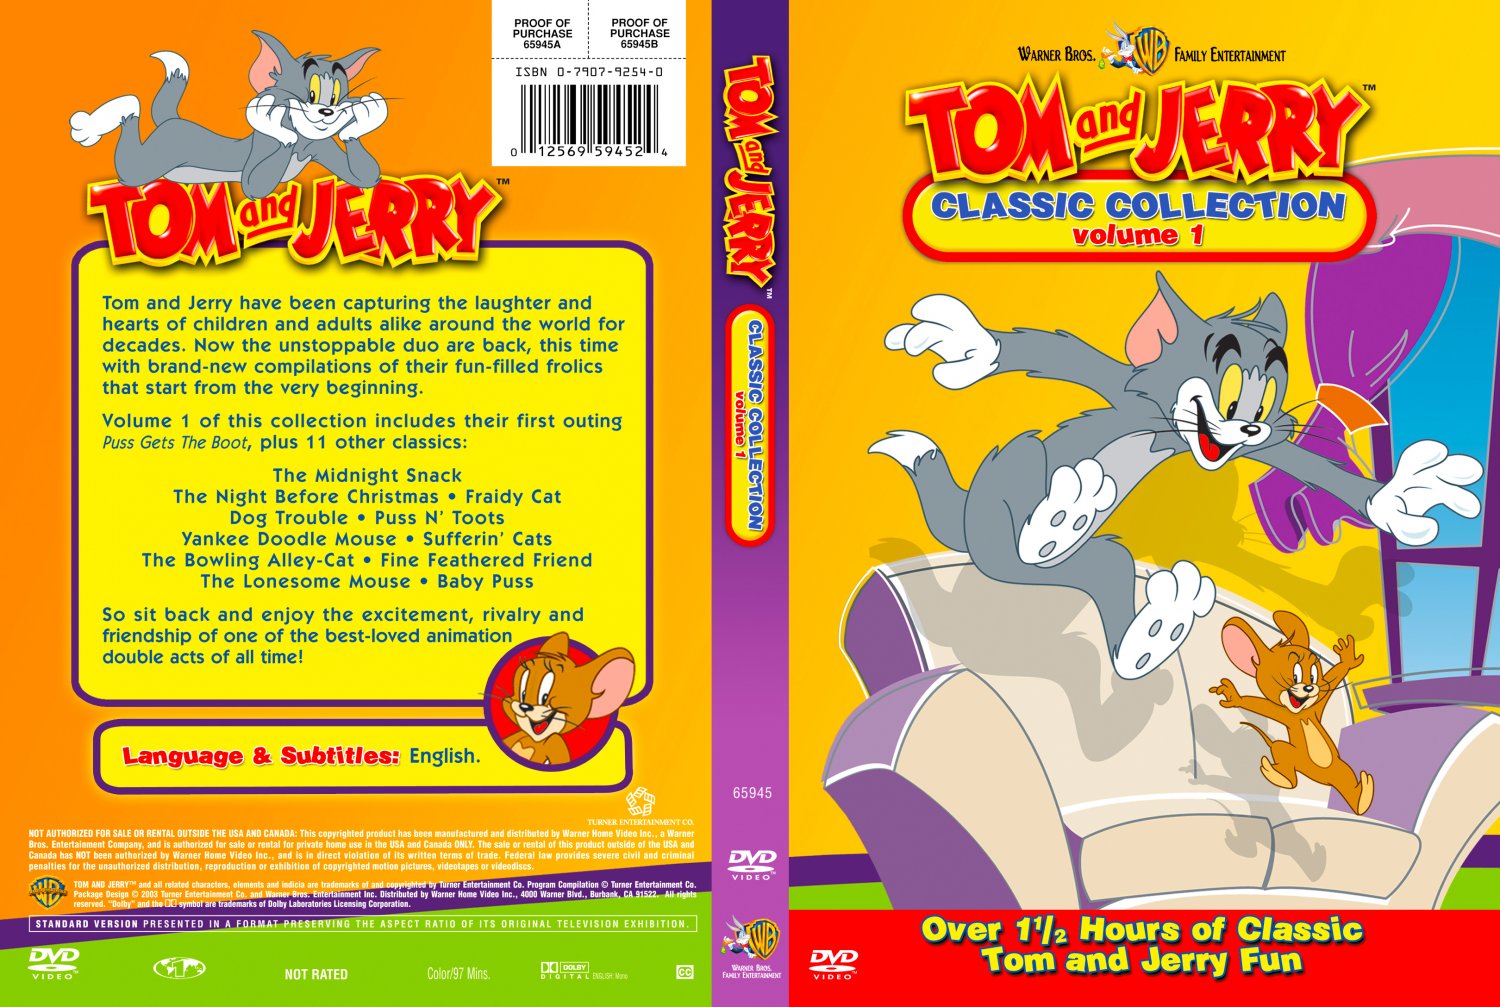 Группа академия тома. Tom and Jerry. Classic collection. Tom and Jerry диск. Tom and Jerry Classic collection DVD. Tom and Jerry collection DVD.